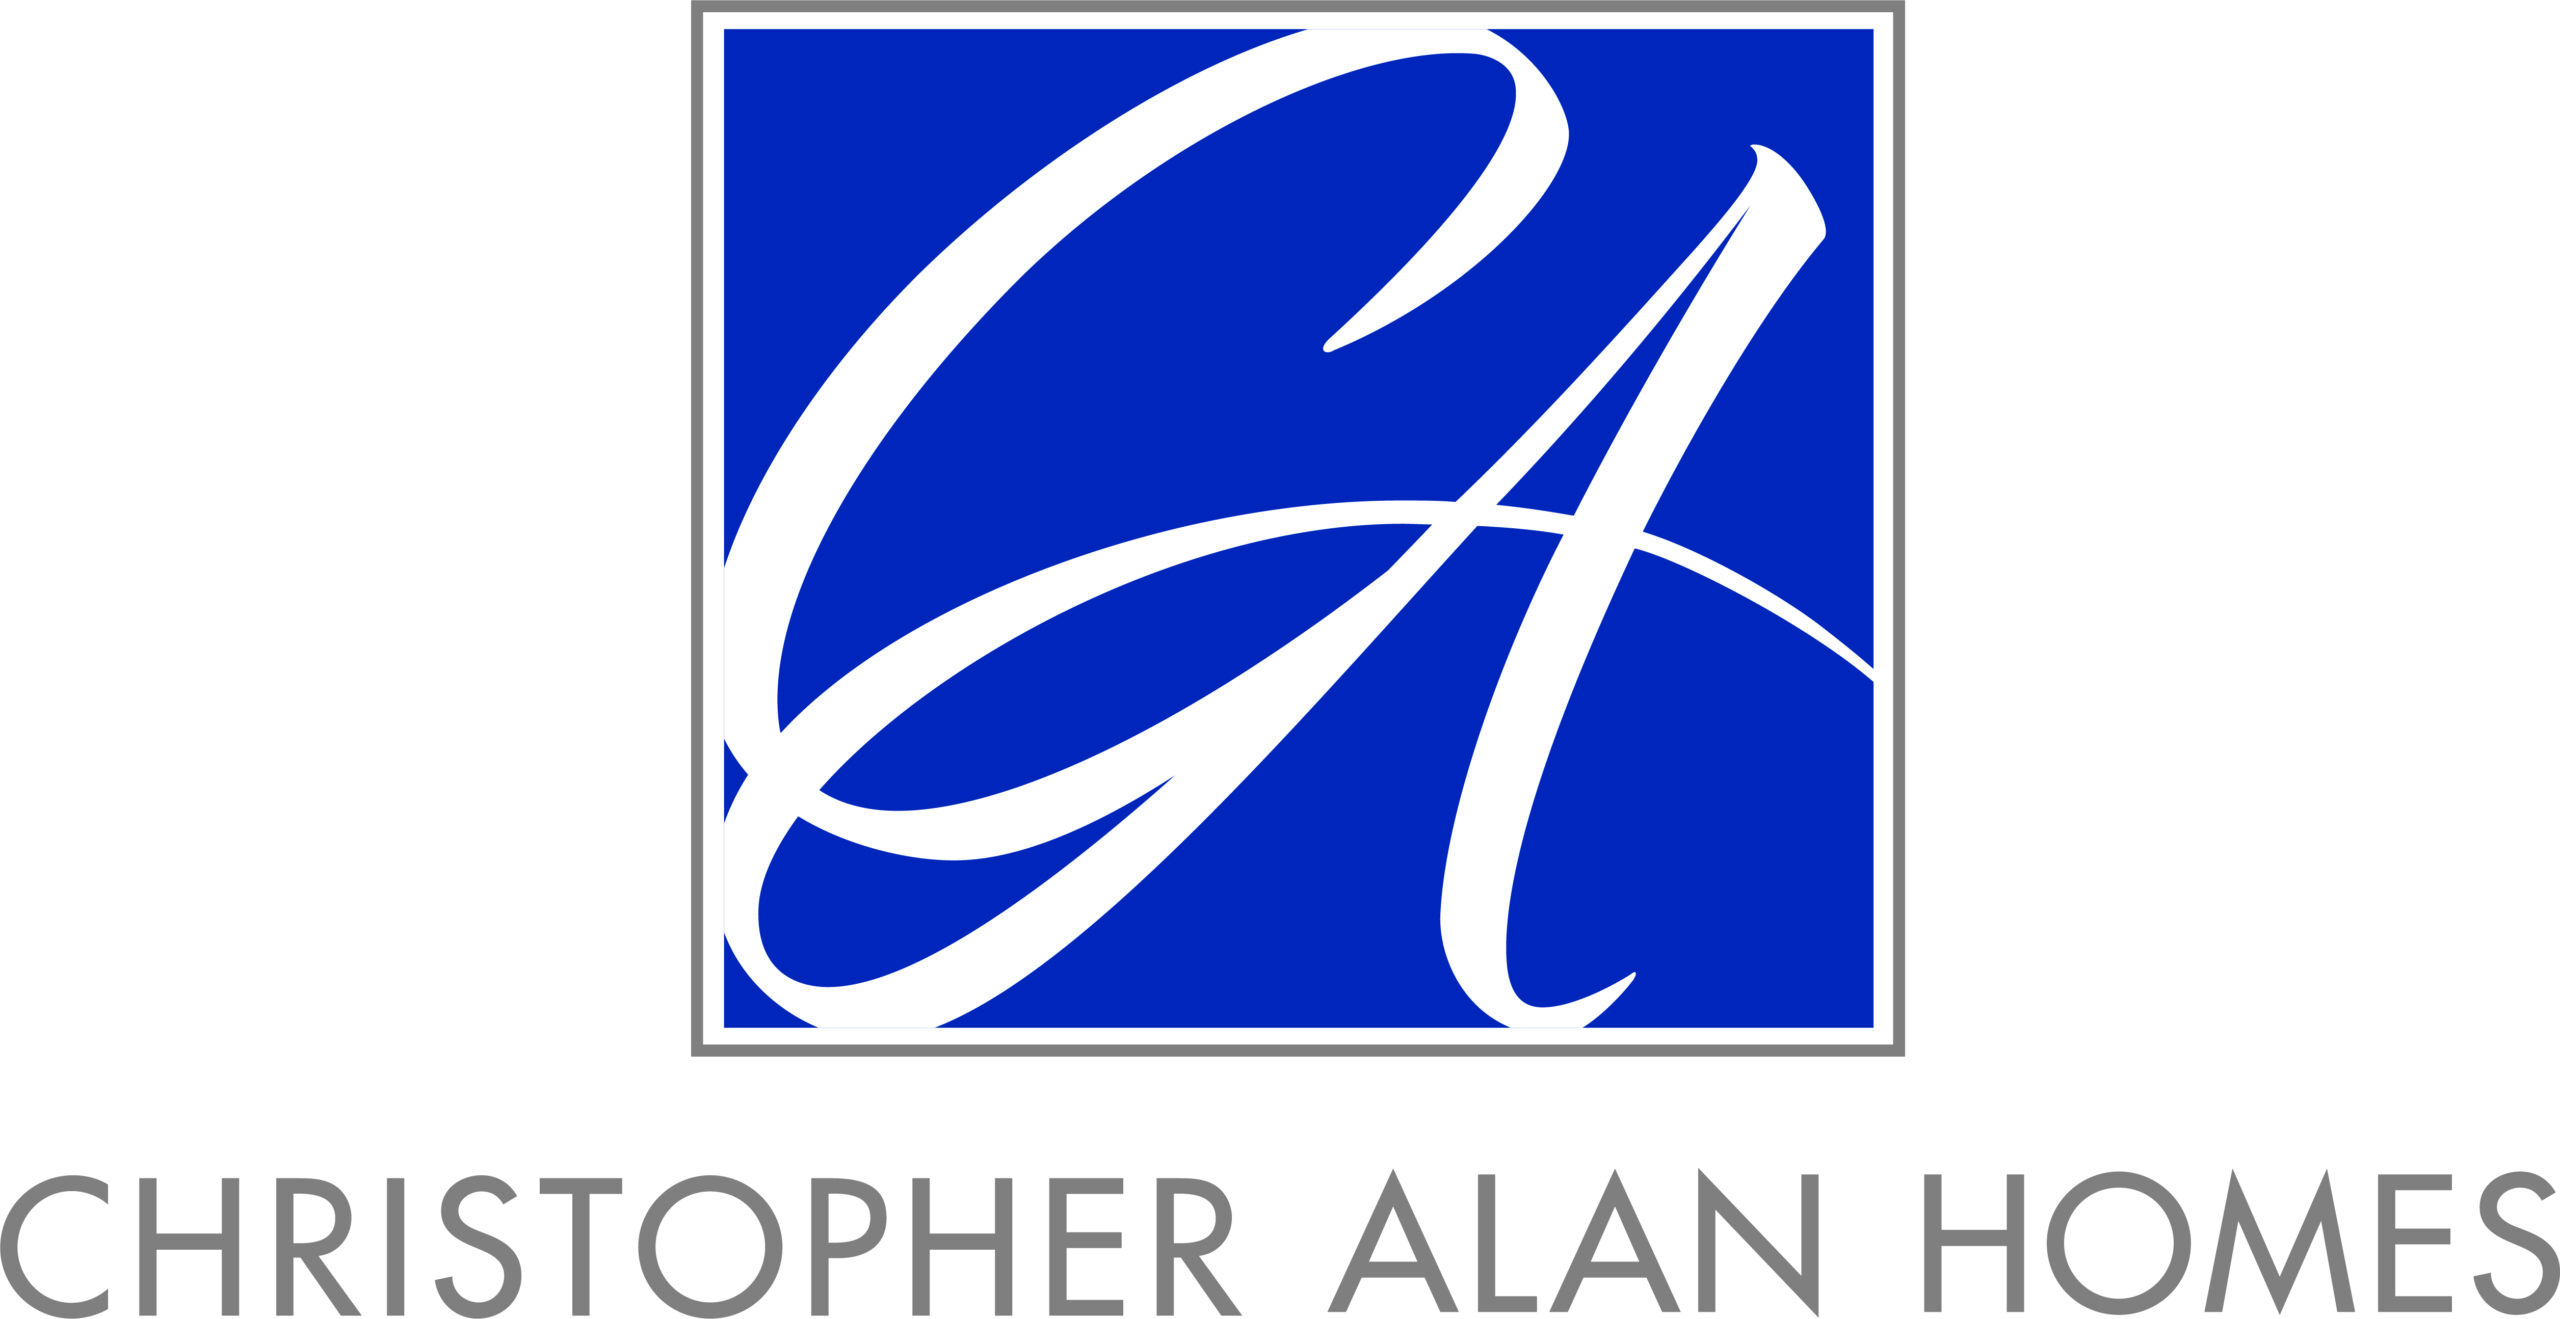 Chirstopher Allan Homes